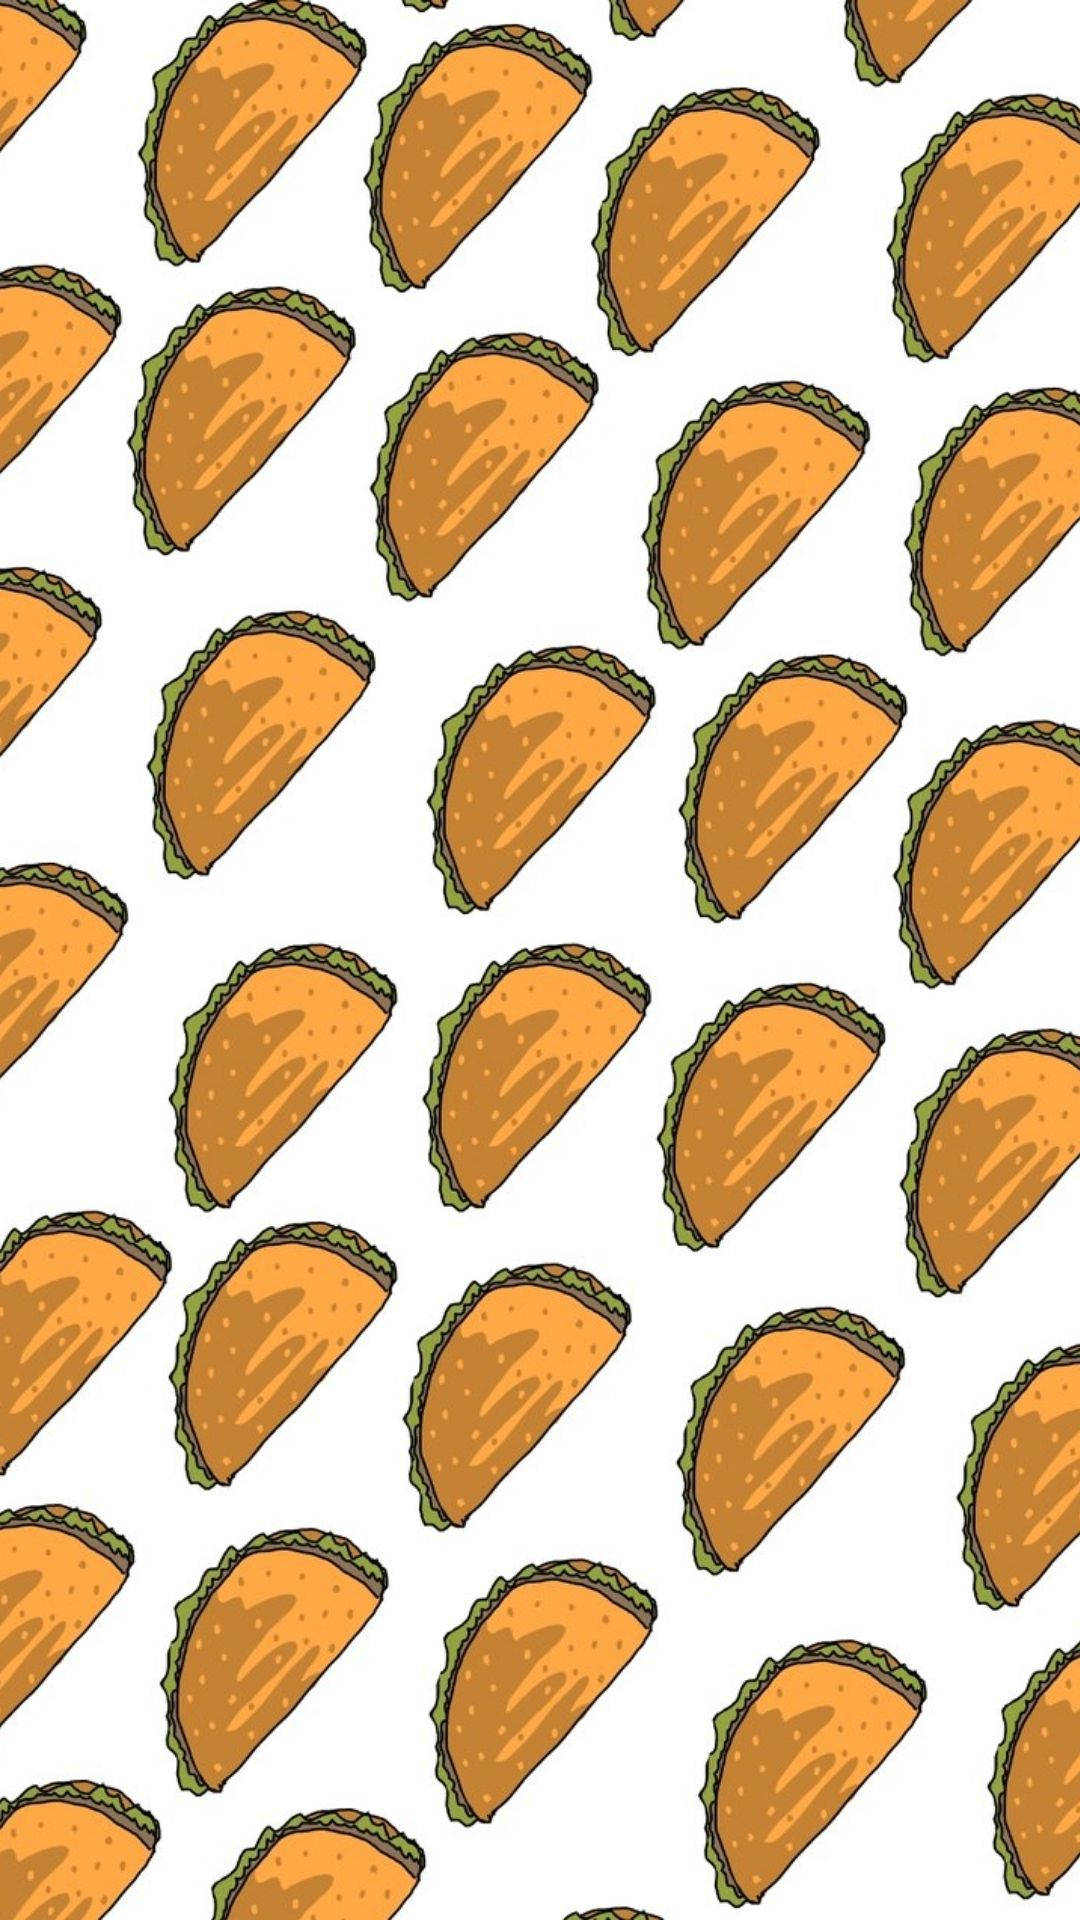 Download Animated Tiny Tacos Wallpaper 